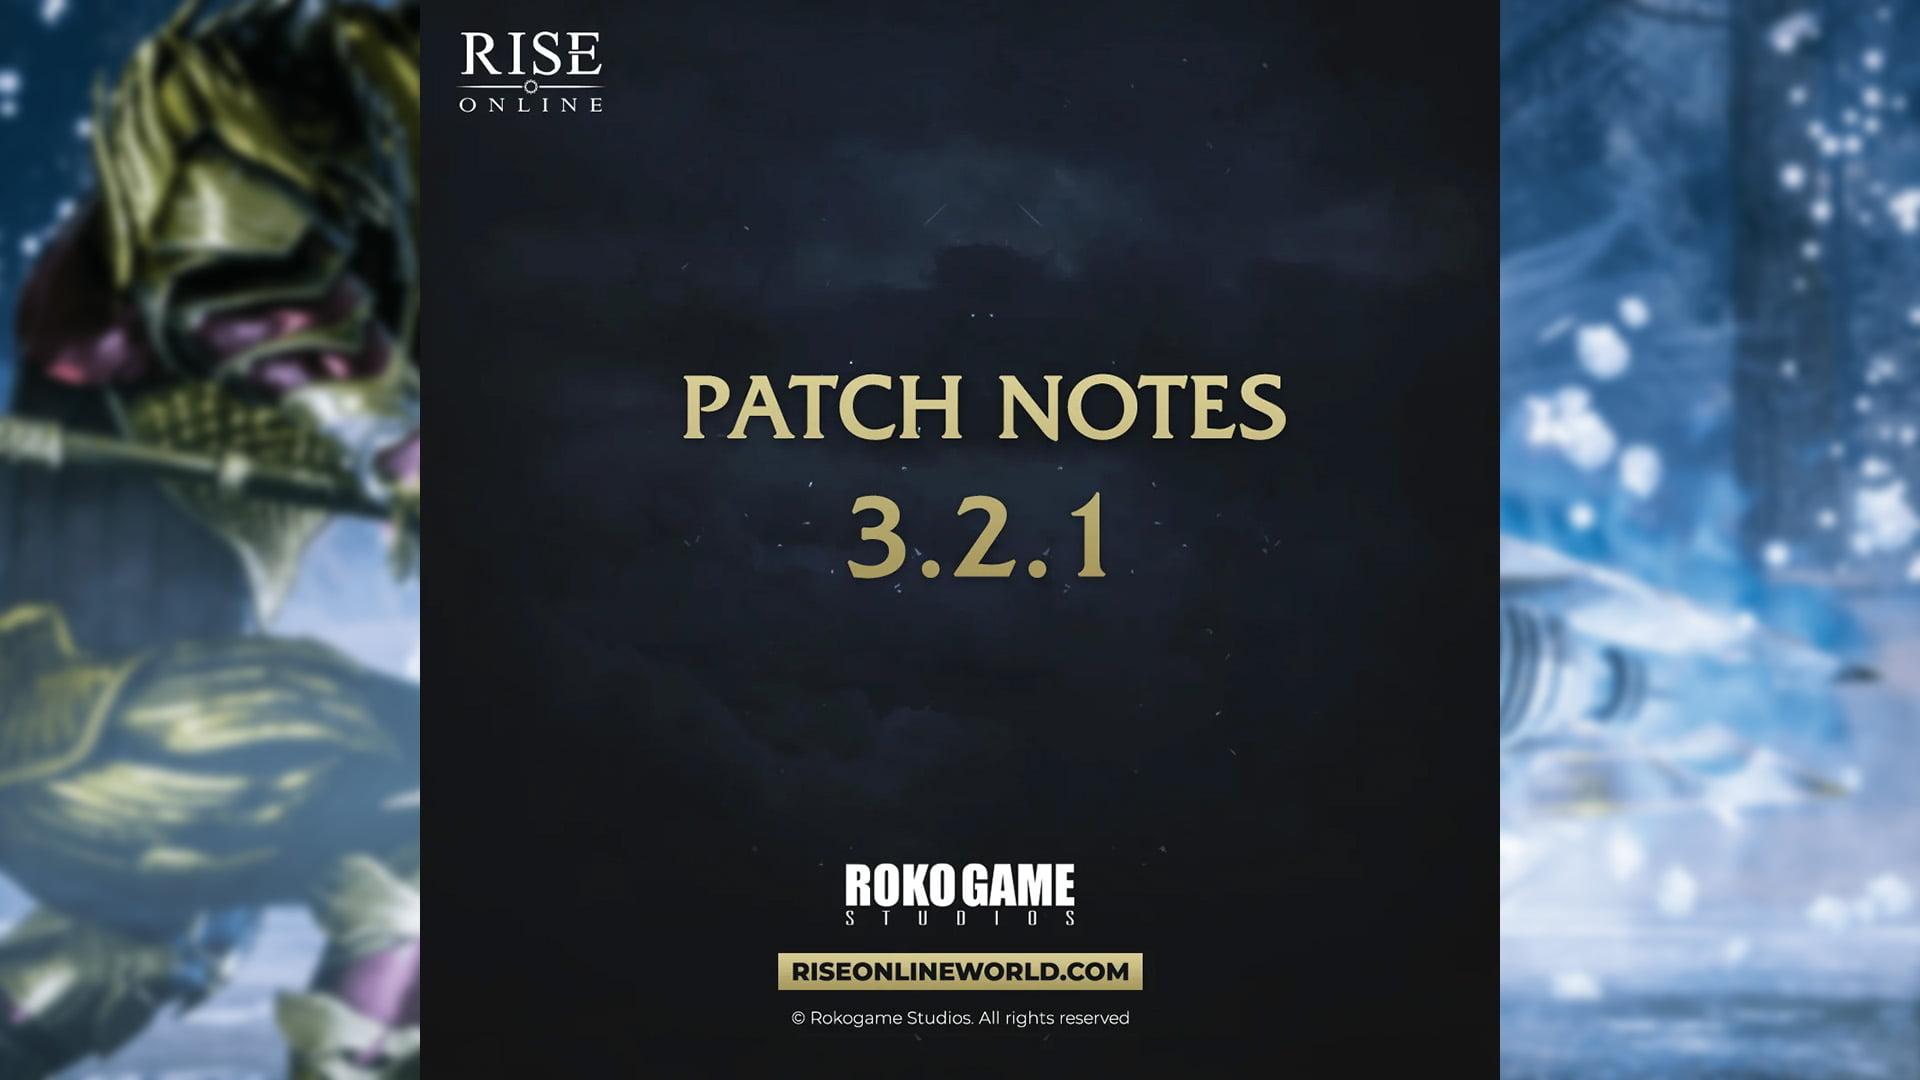 Rise Online – 3.2.1 Patch Notes